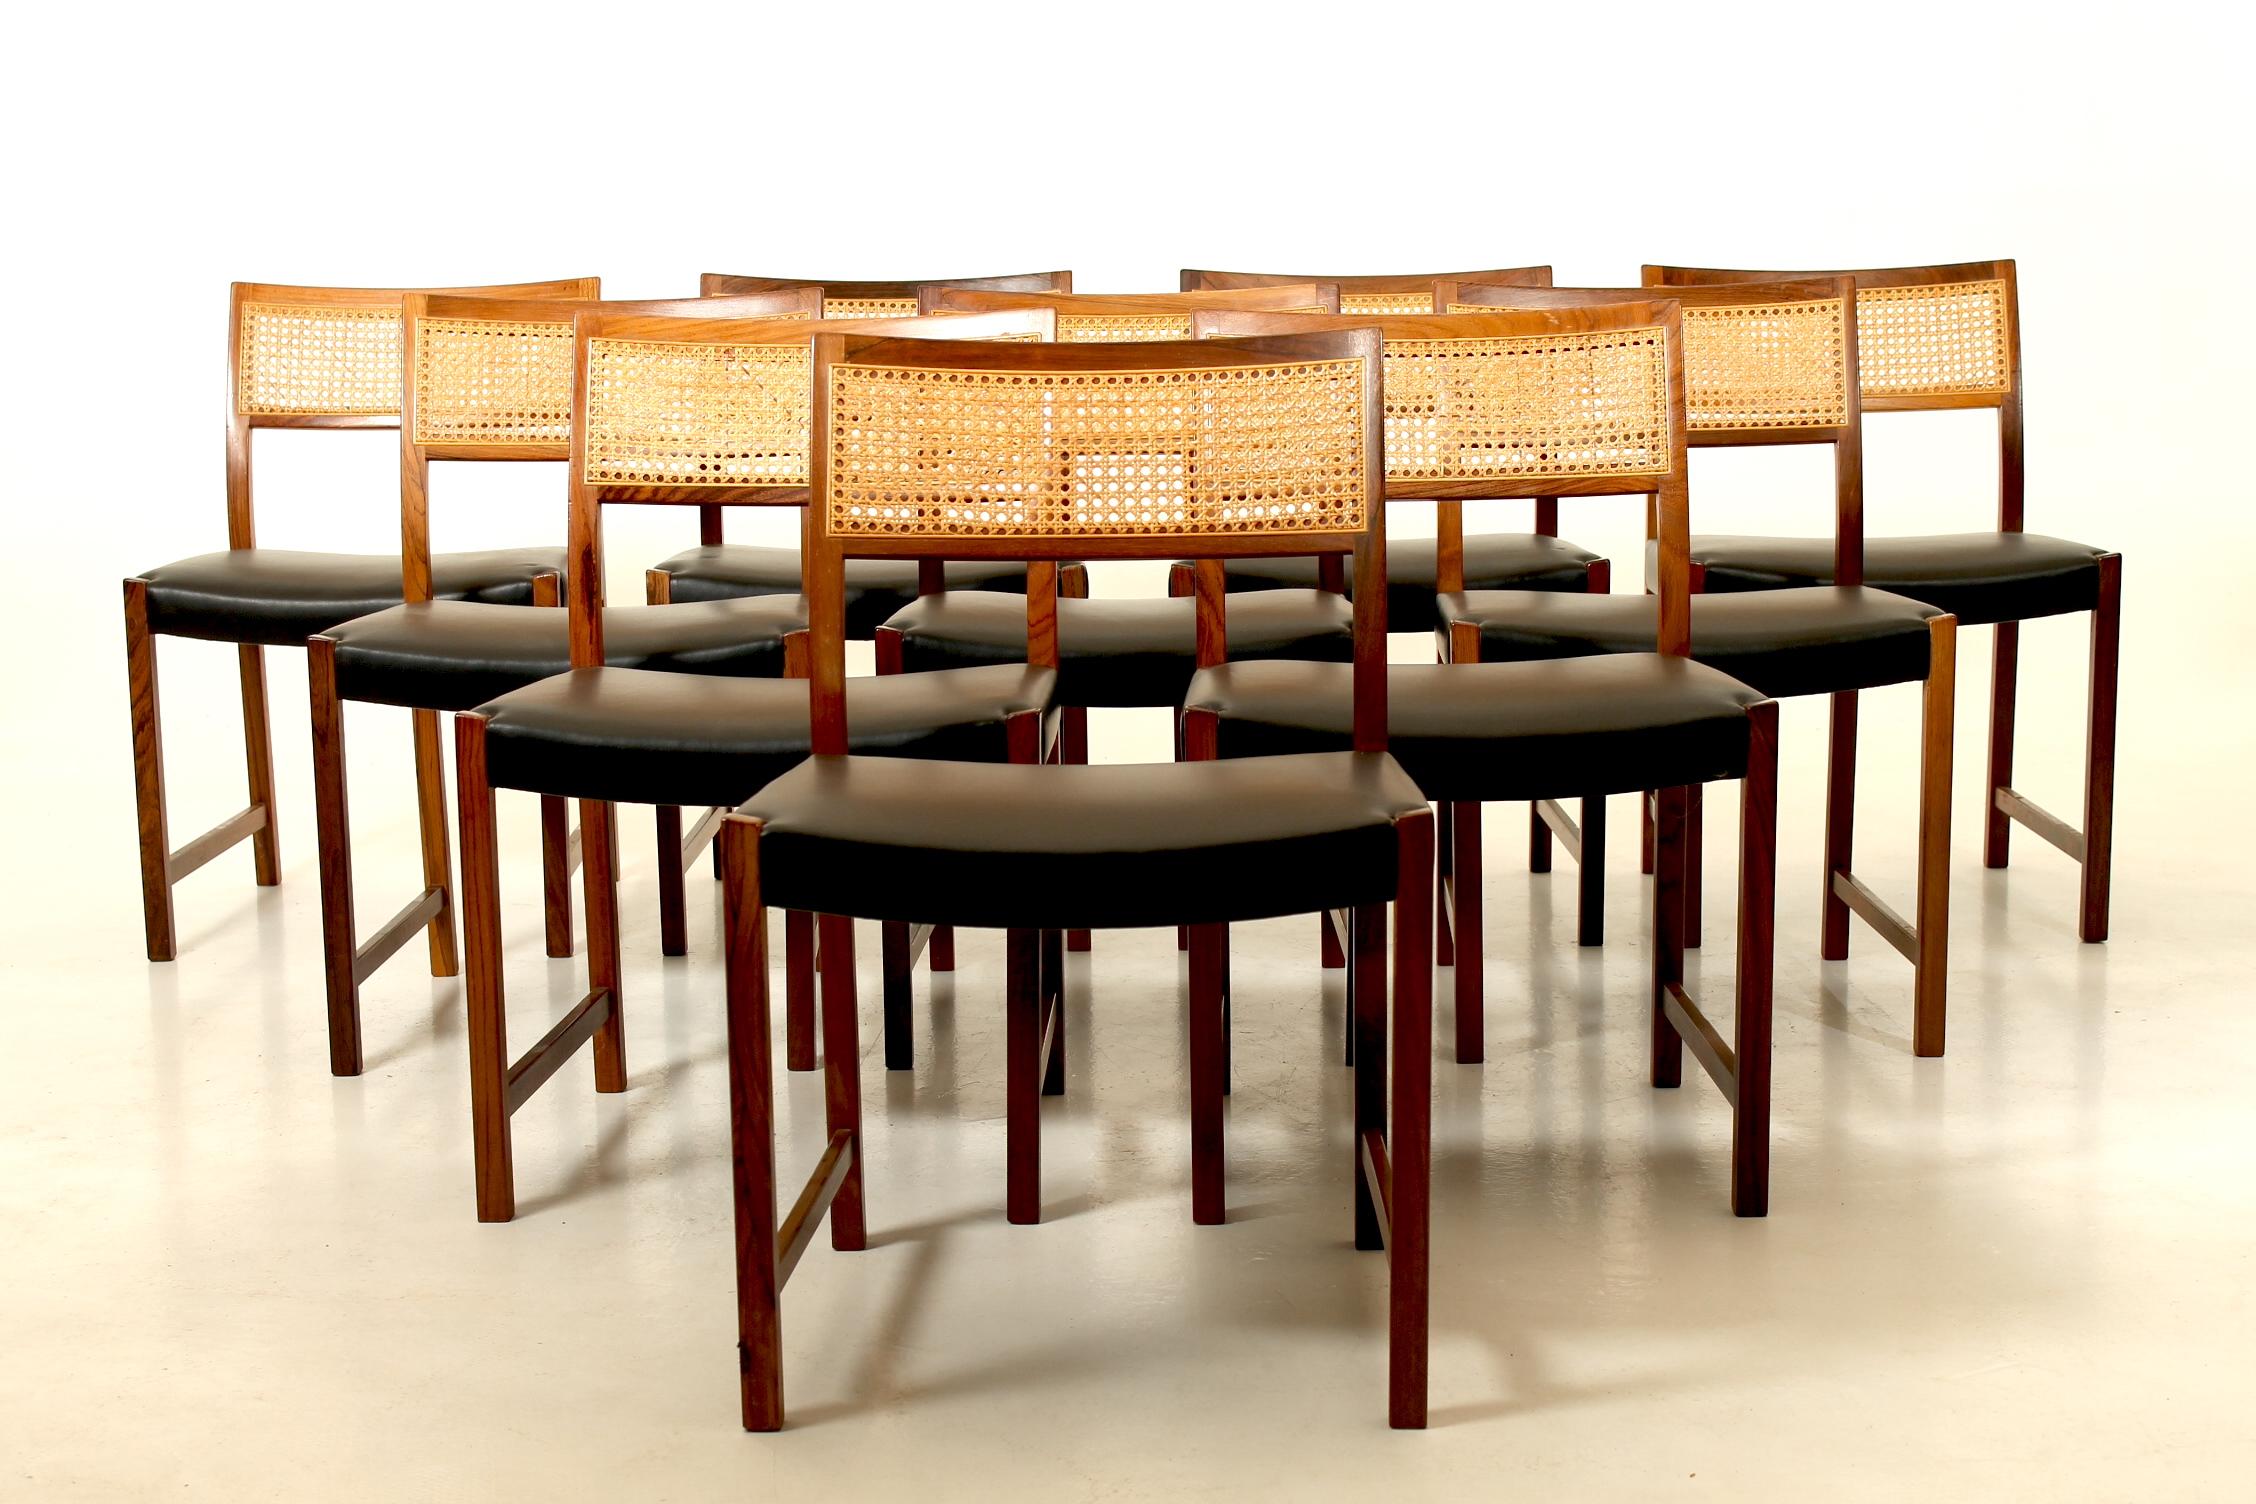 Unique and large set of 10 side chairs in rosewood, rattan and new leather. Designed by Illum Wikkelsø and manufactured by CFC Silkeborg, Denmark. 